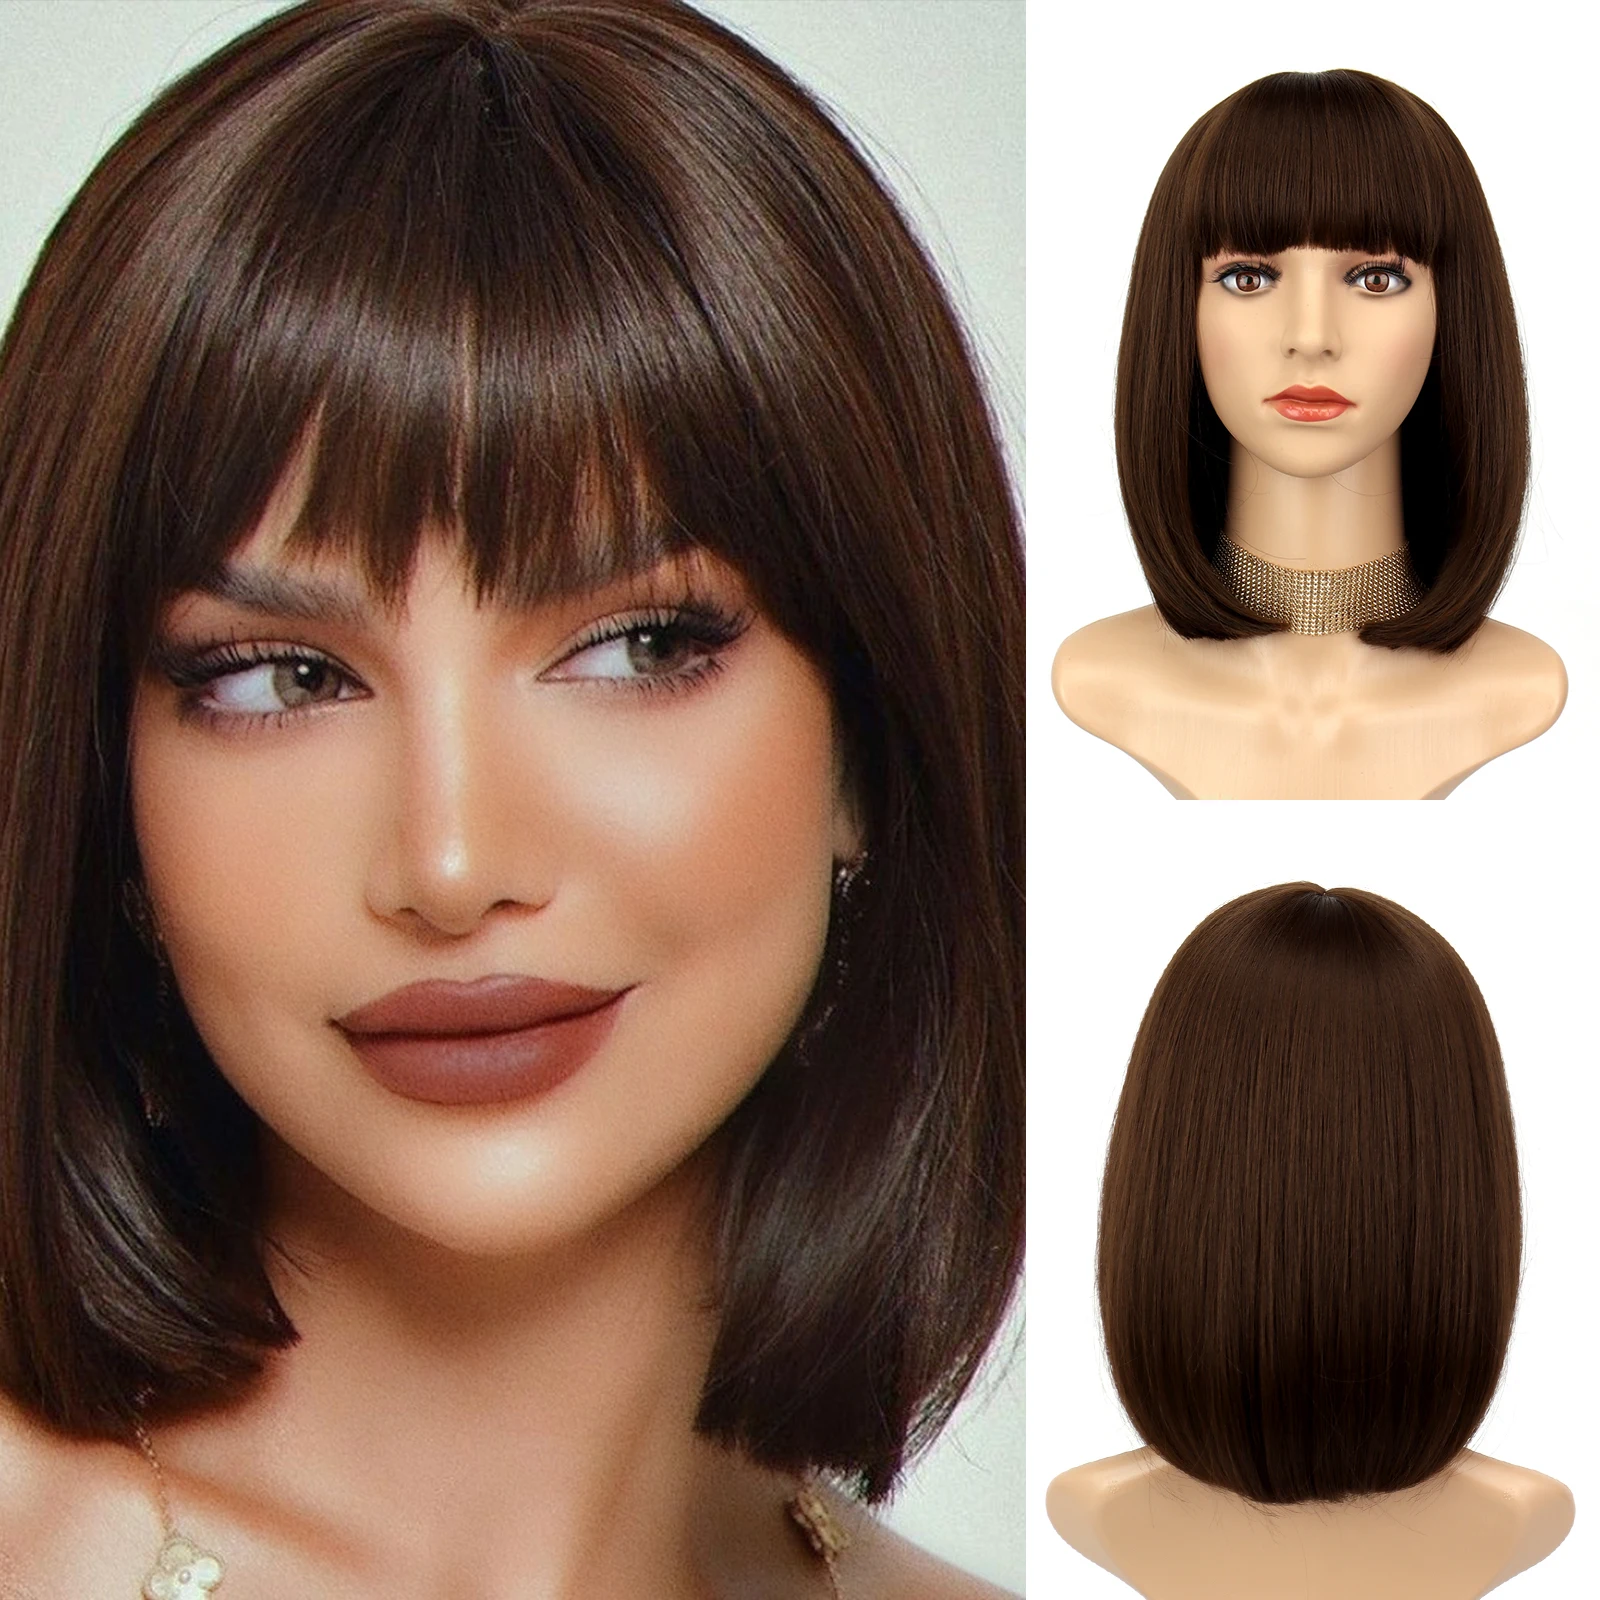 Short Straight Hair Women Synthetic Wig Dark Brown Bob  Wigs With Bangs Daily Wear Thermally Resistant Fibre Cosplay Party Wigs